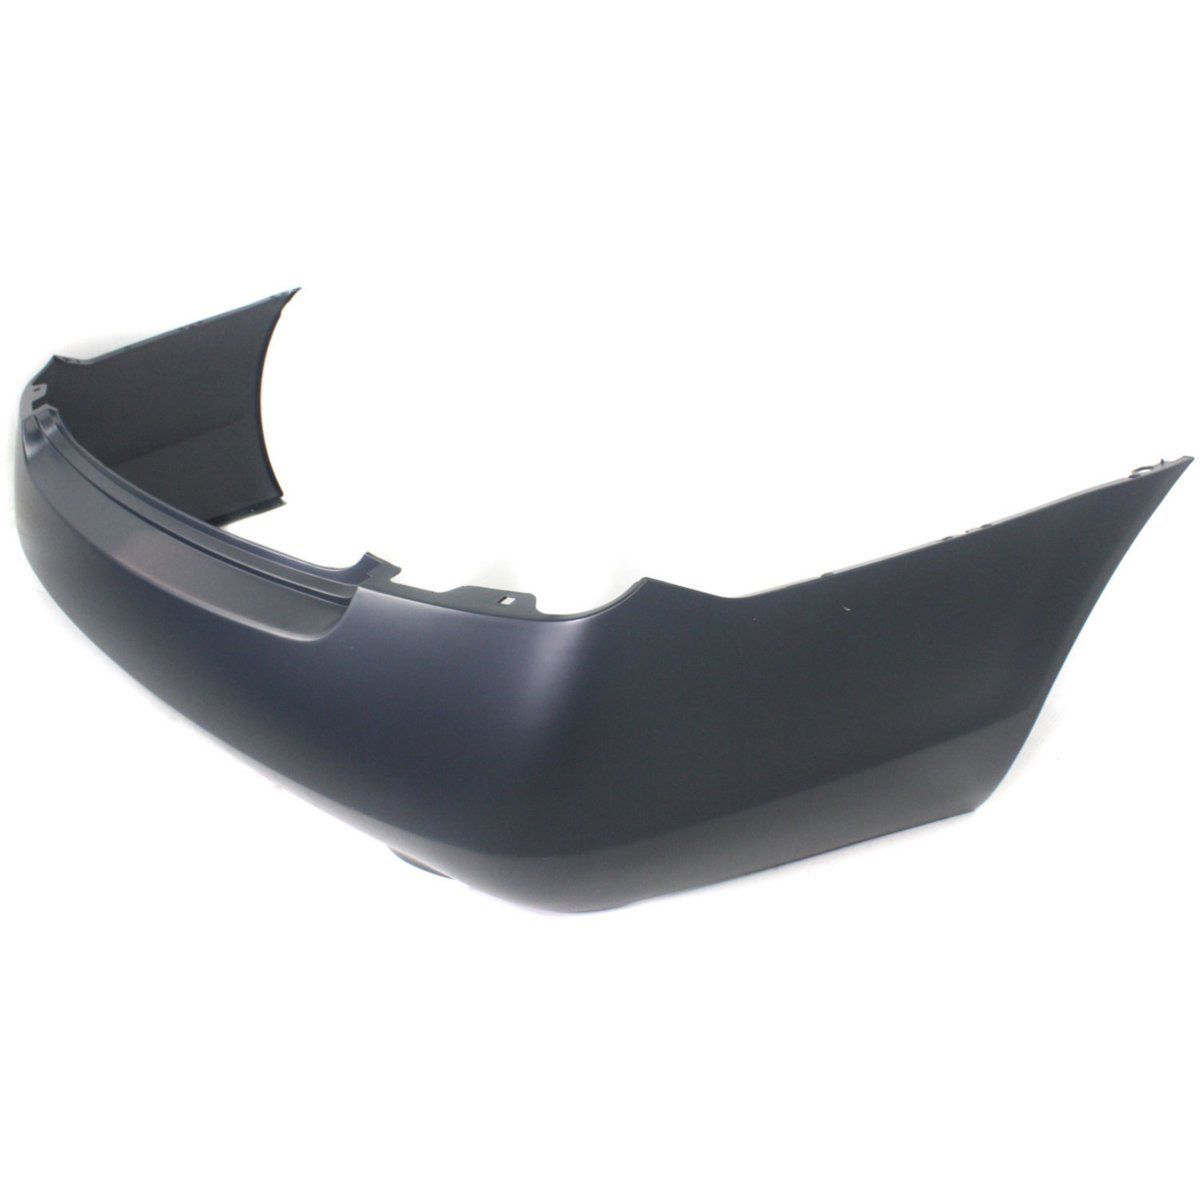 2002-2006 NISSAN ALTIMA Rear Bumper Cover w/3.5L V6 engine Painted to Match